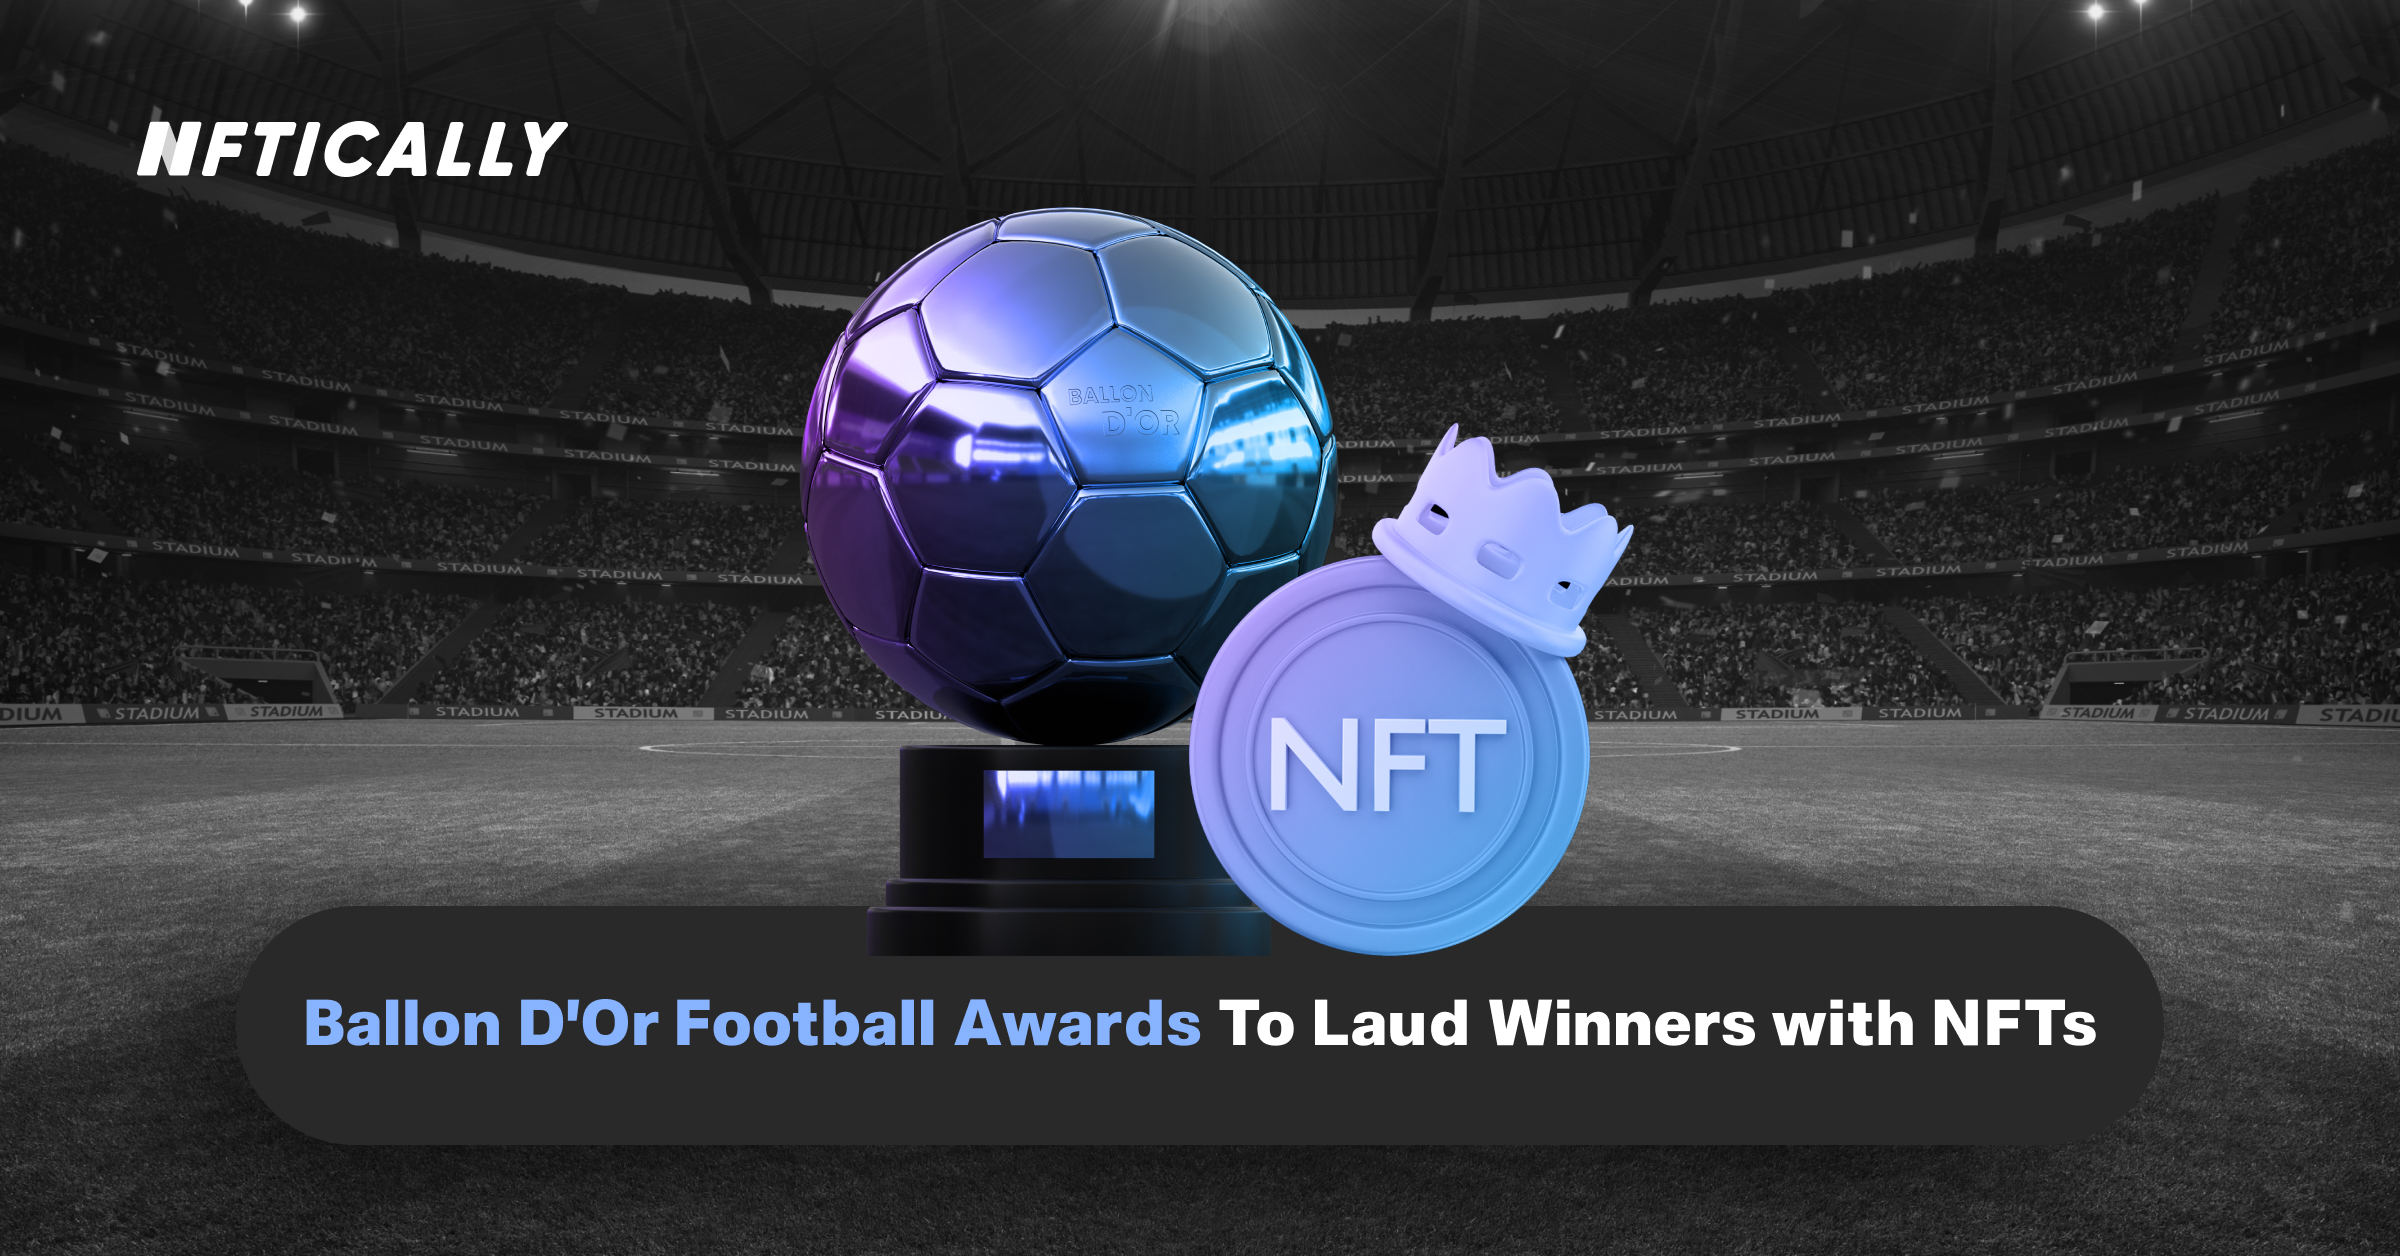 Ballon D’Or Football Awards To Laud Winners with NFTs.